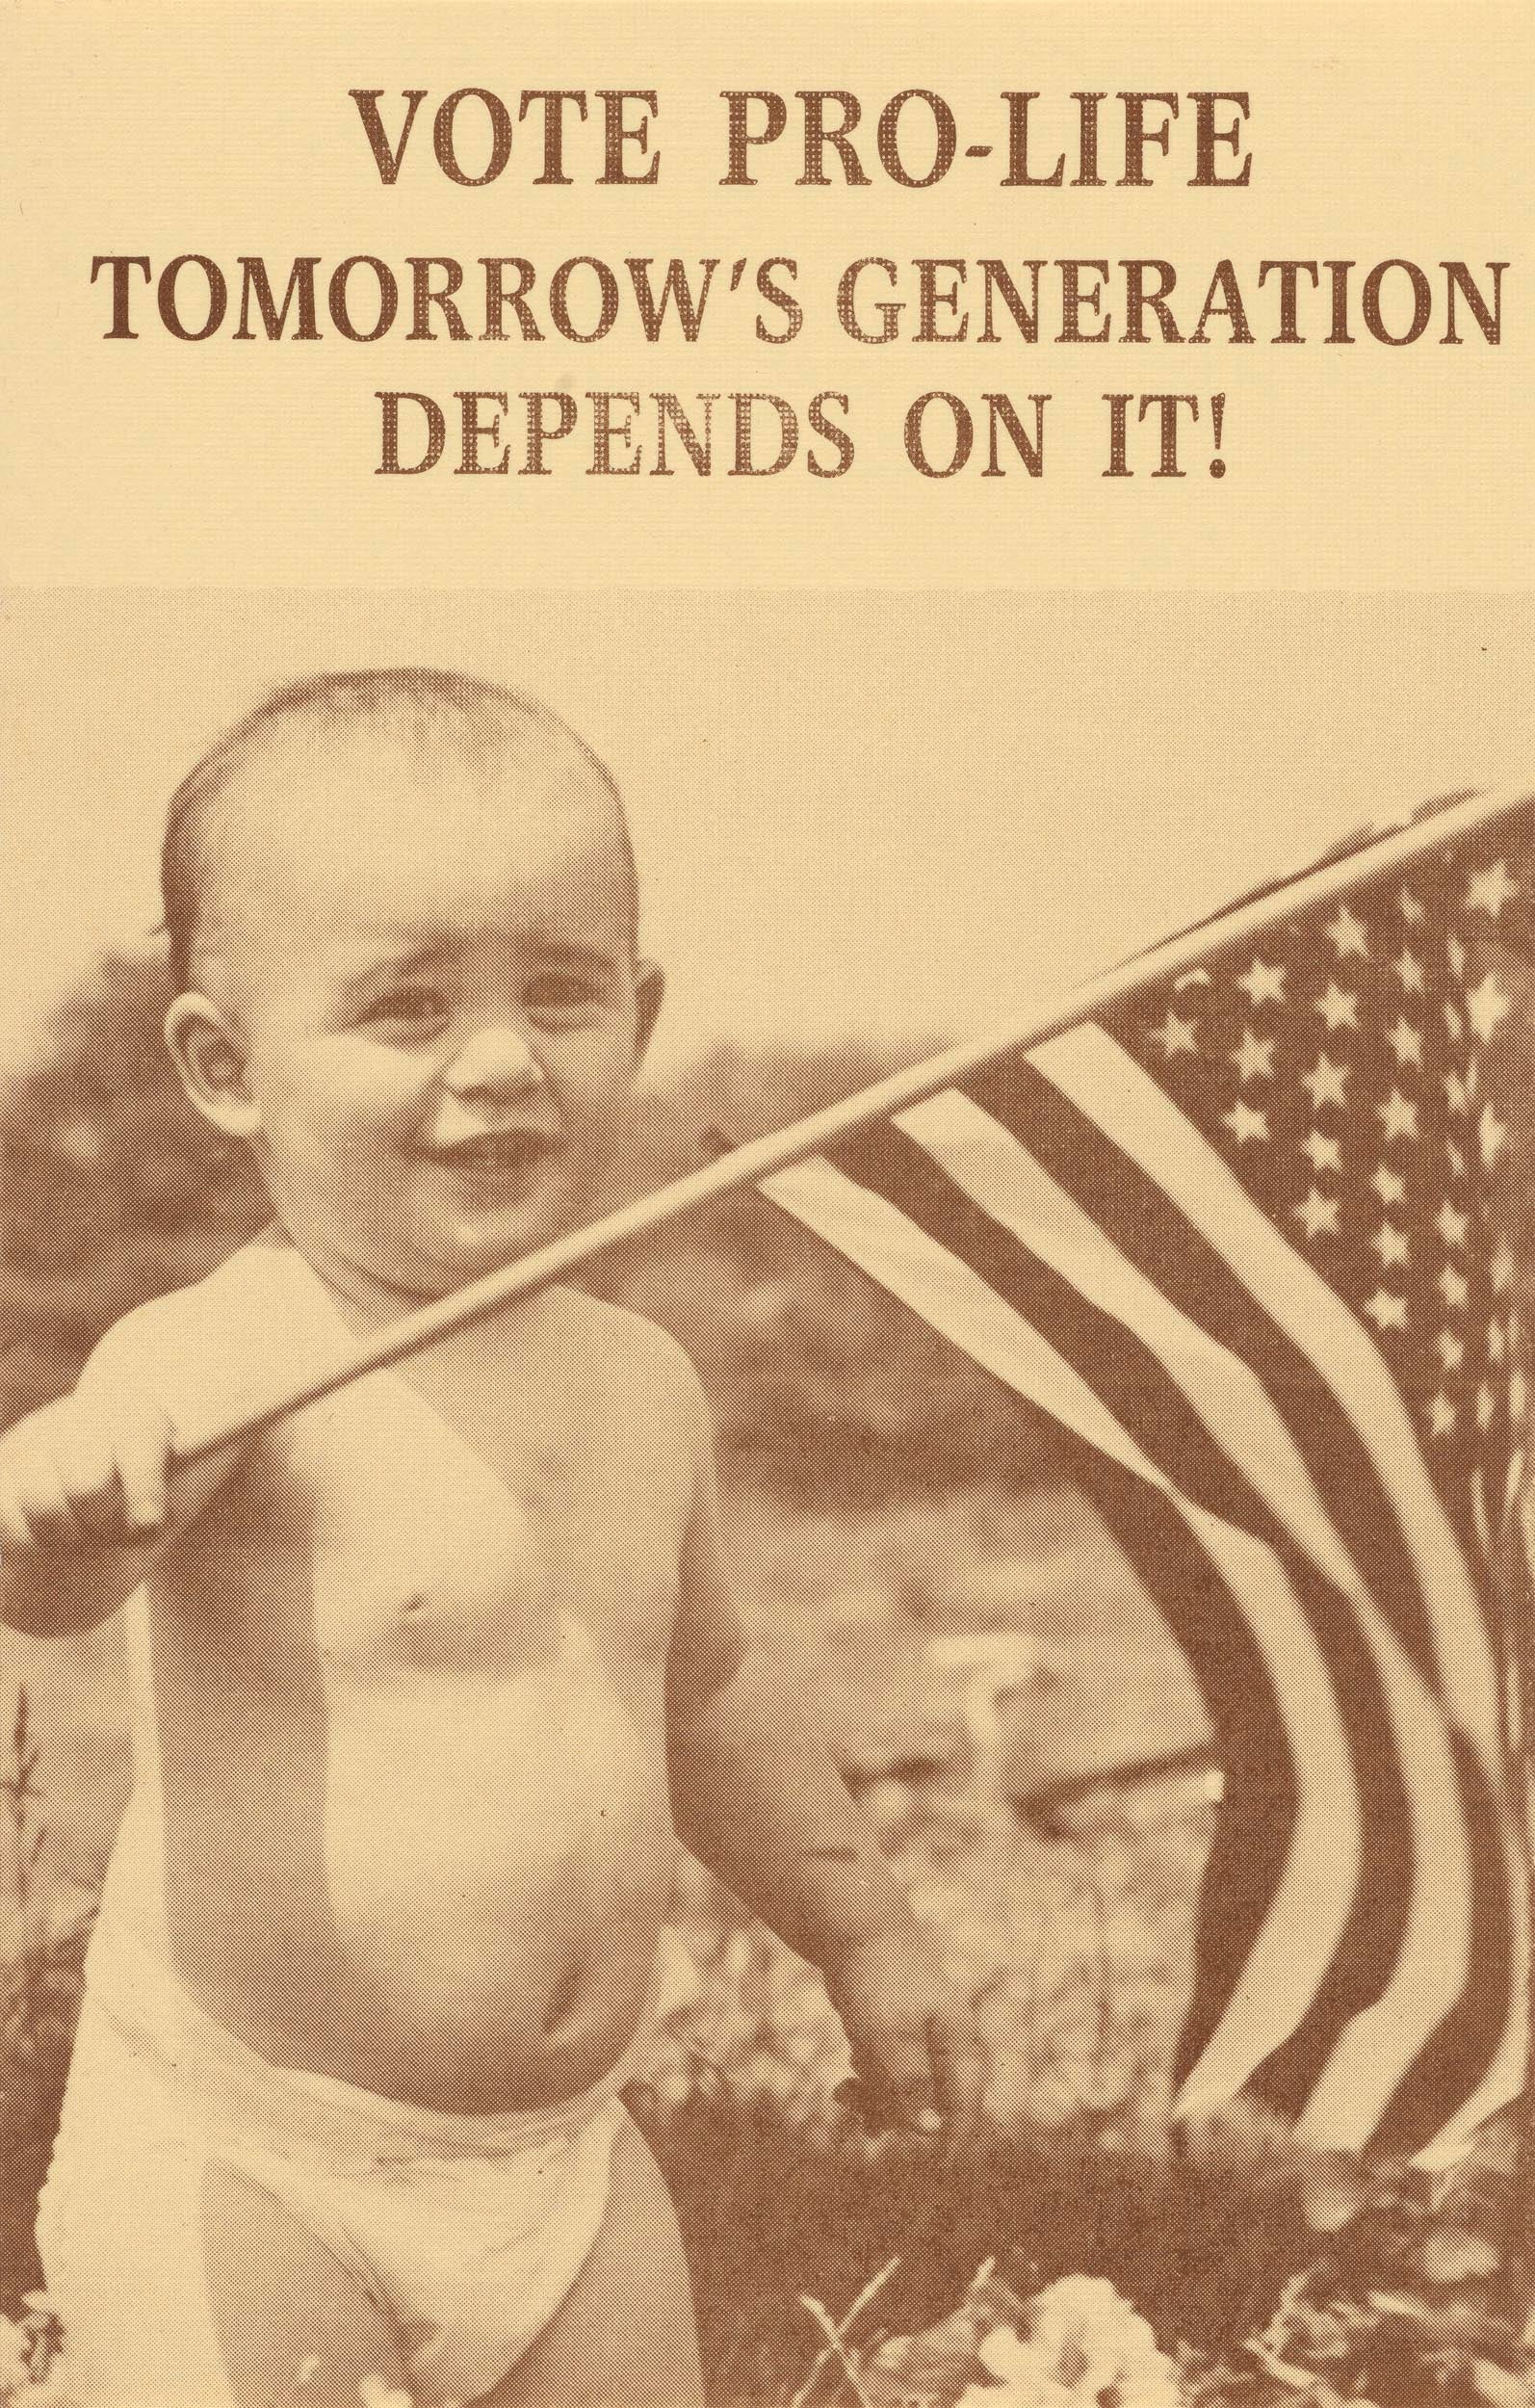 Cover of archival brochure from exhibition reads "Vote pro-life. Tomorrow's generation depends on it!"